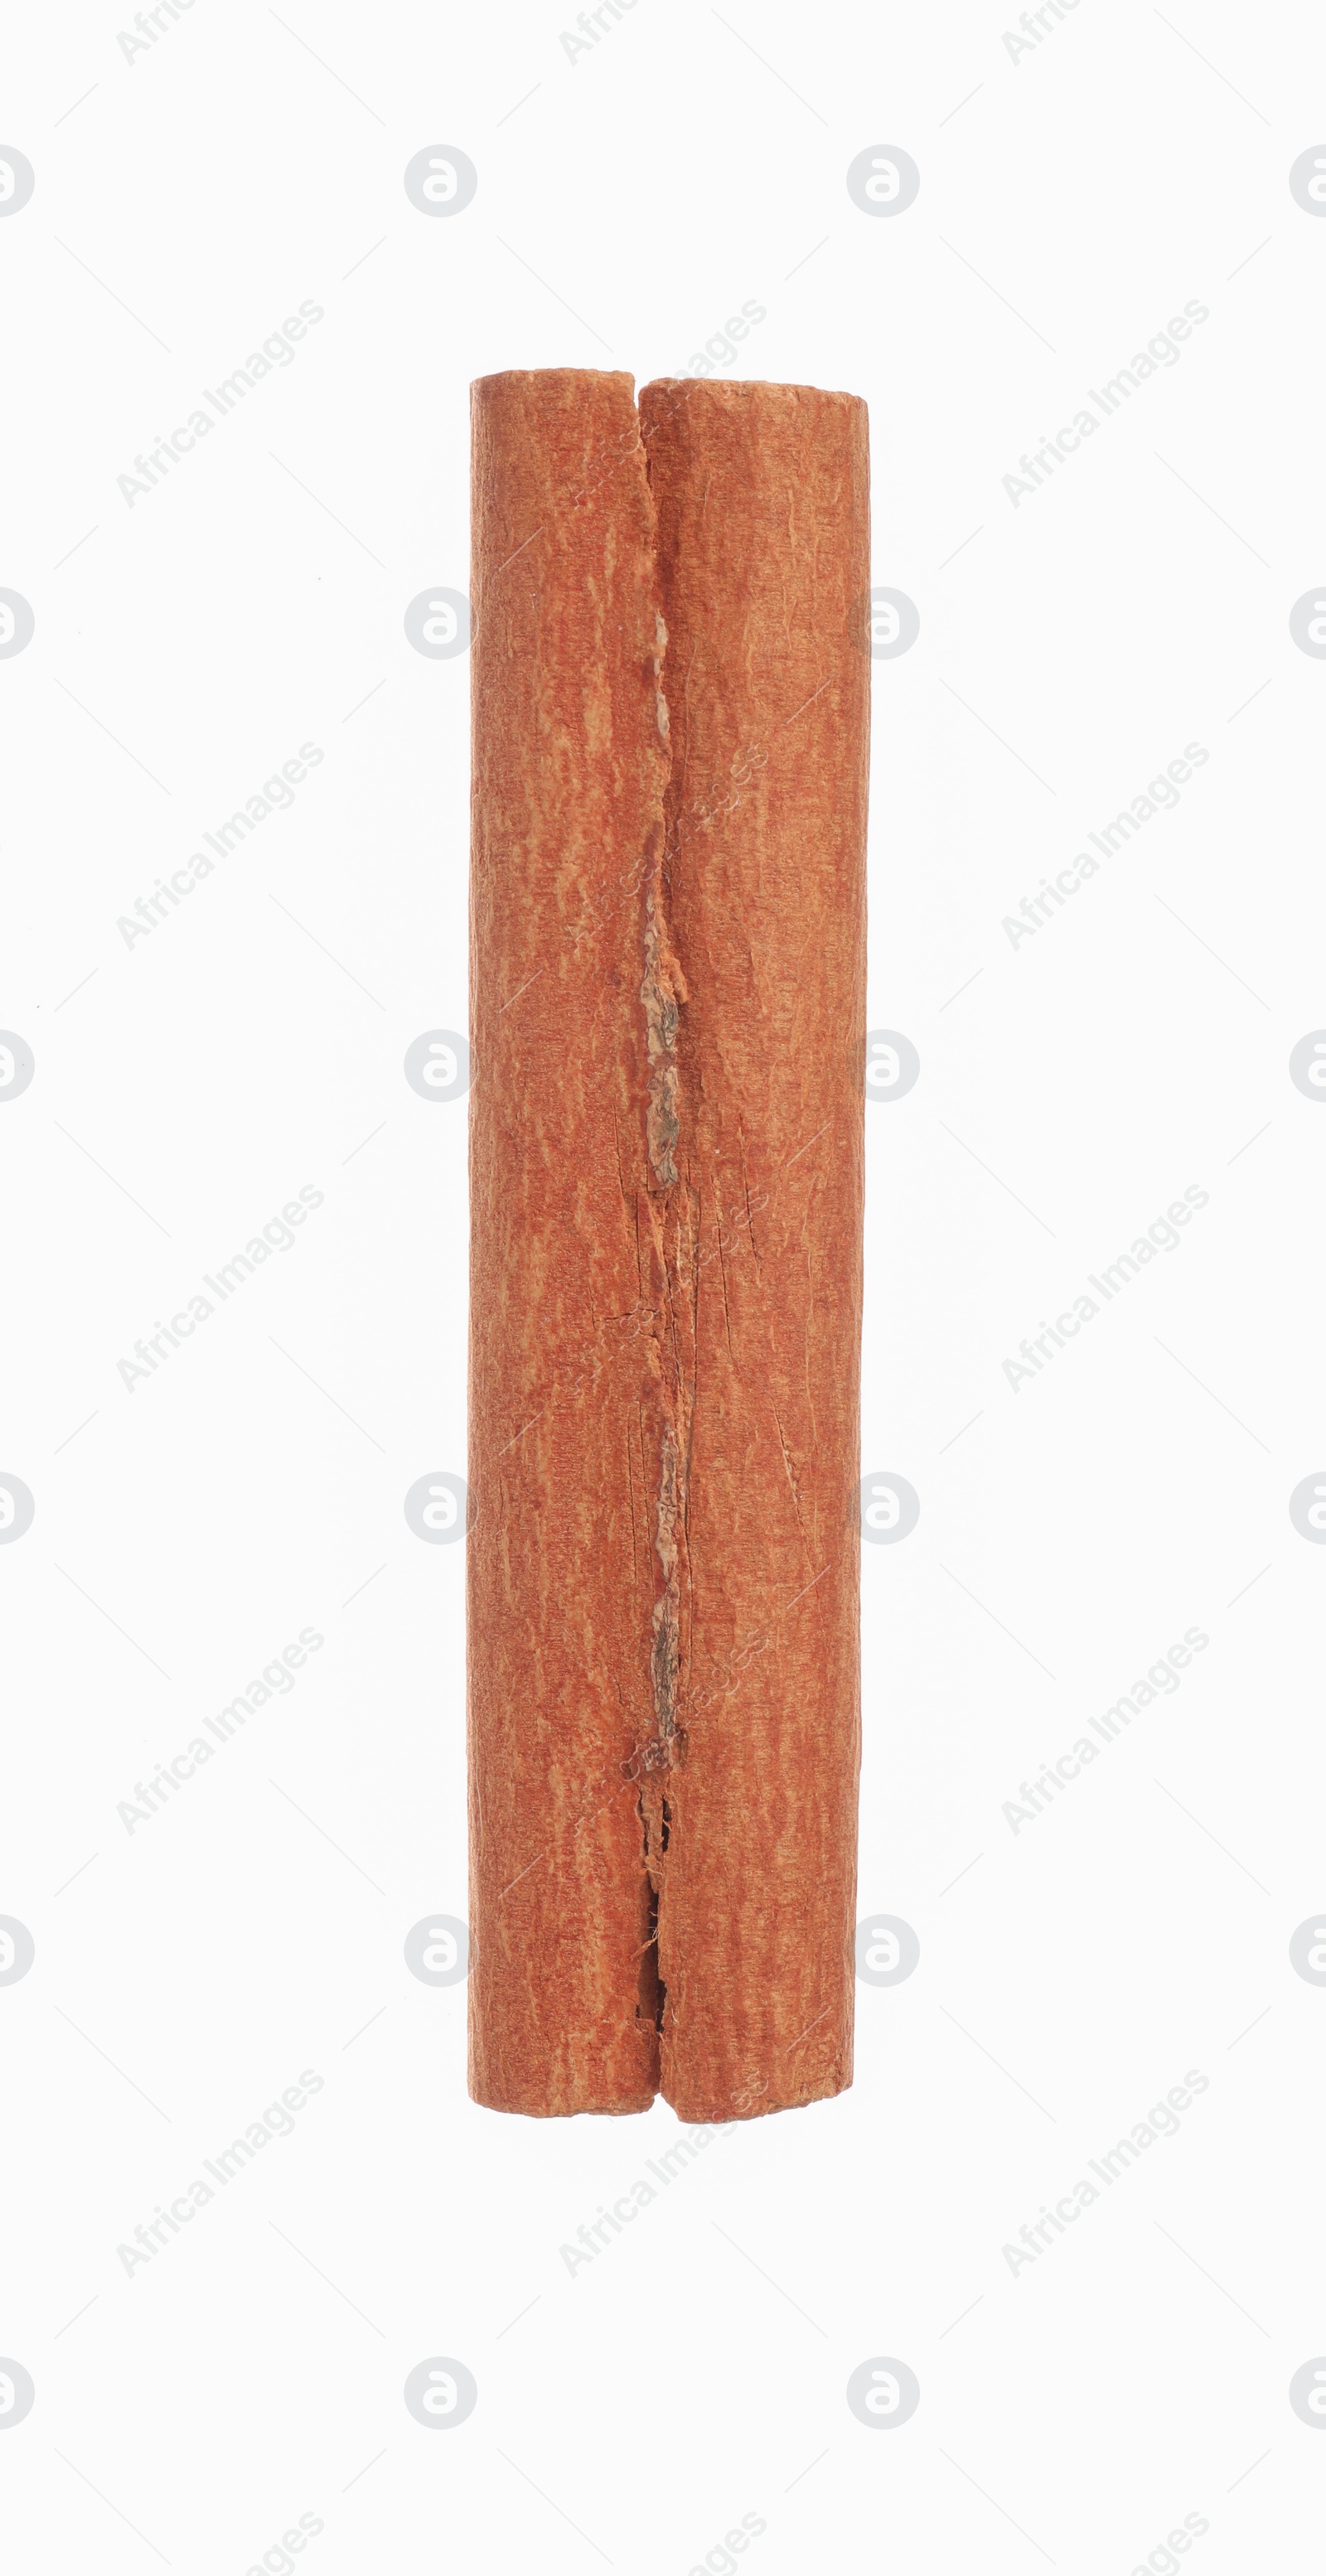 Photo of Dry aromatic cinnamon stick isolated on white